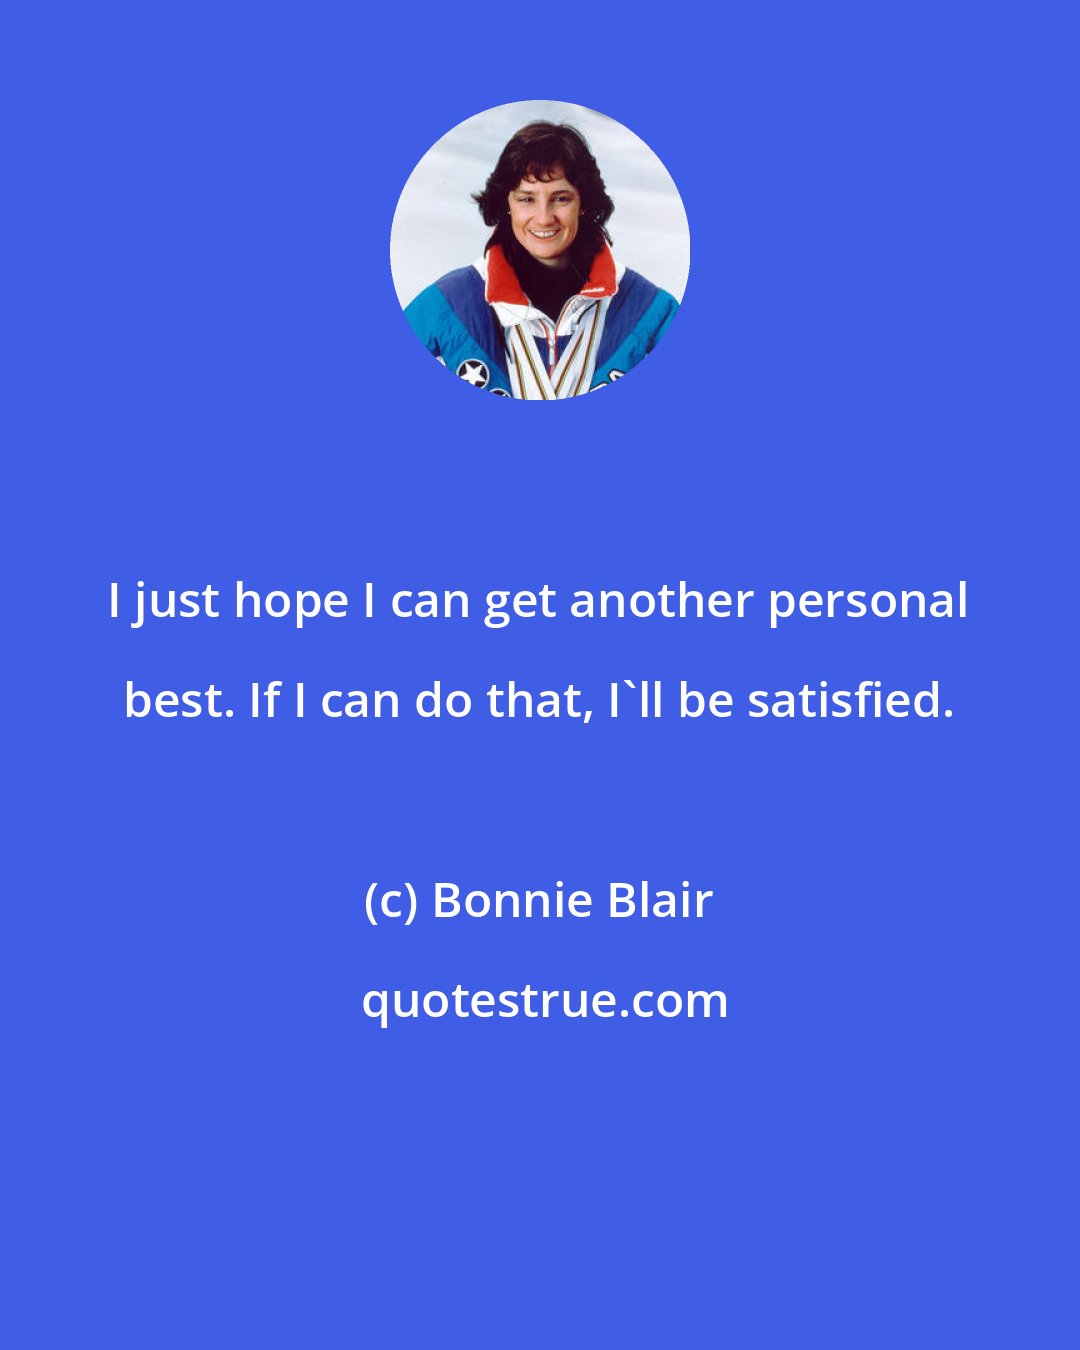 Bonnie Blair: I just hope I can get another personal best. If I can do that, I'll be satisfied.